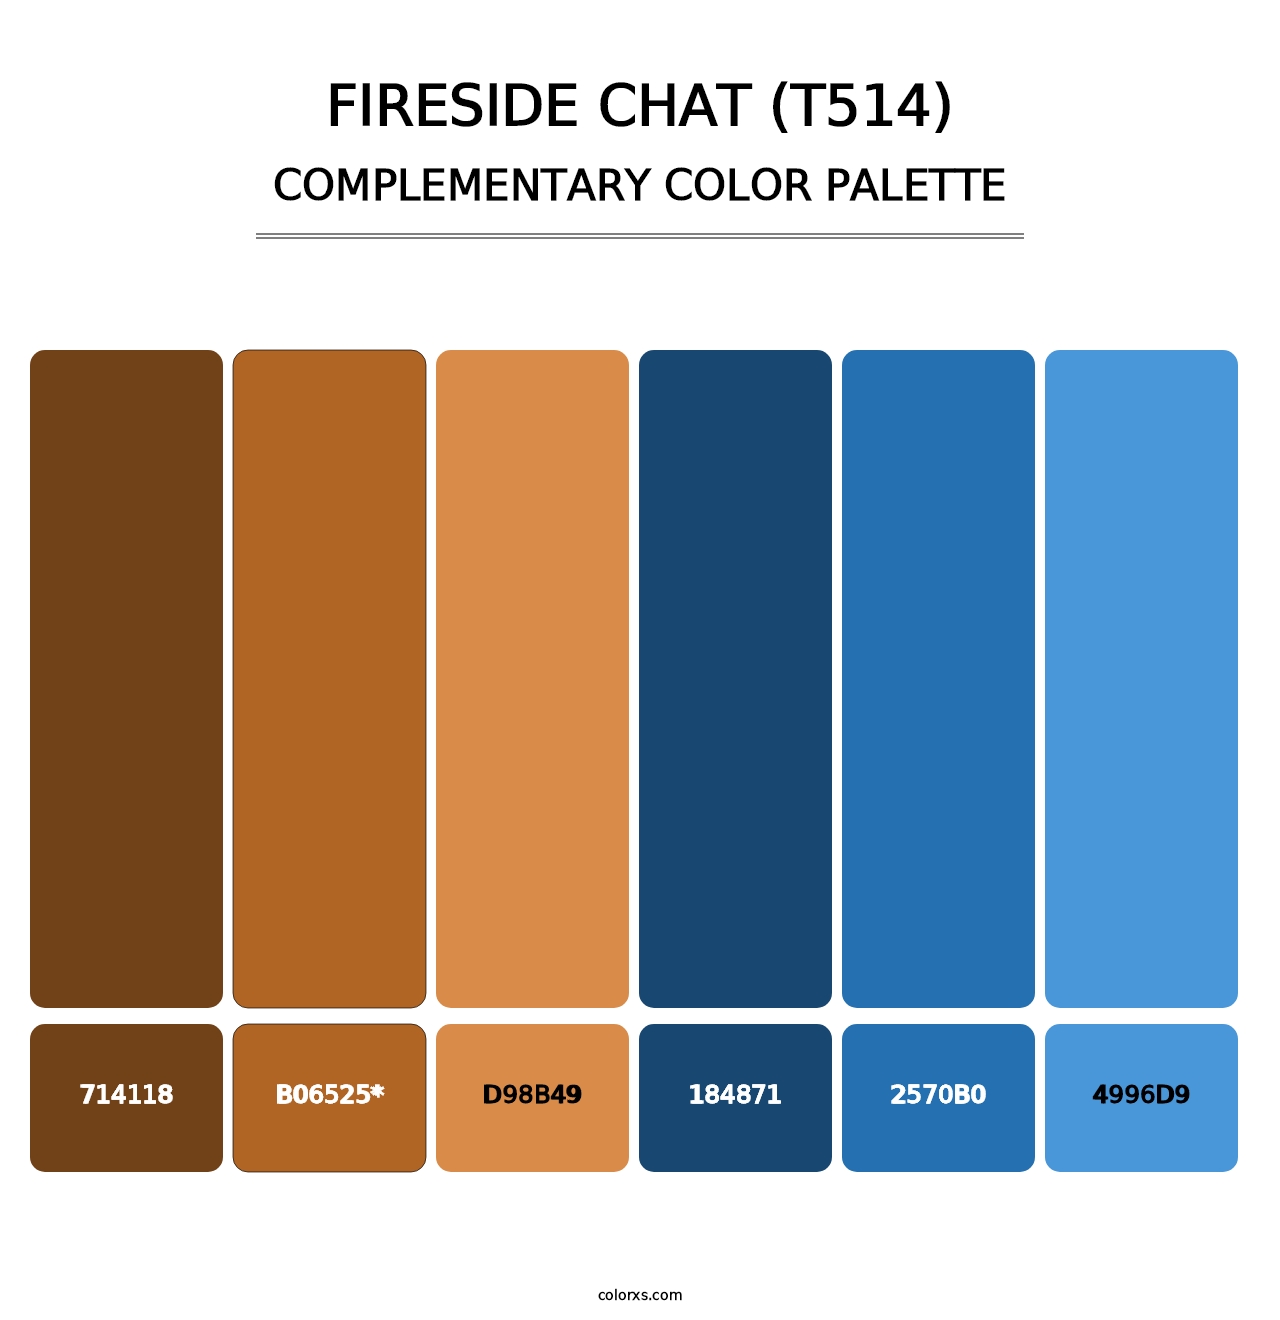 Fireside Chat (T514) - Complementary Color Palette